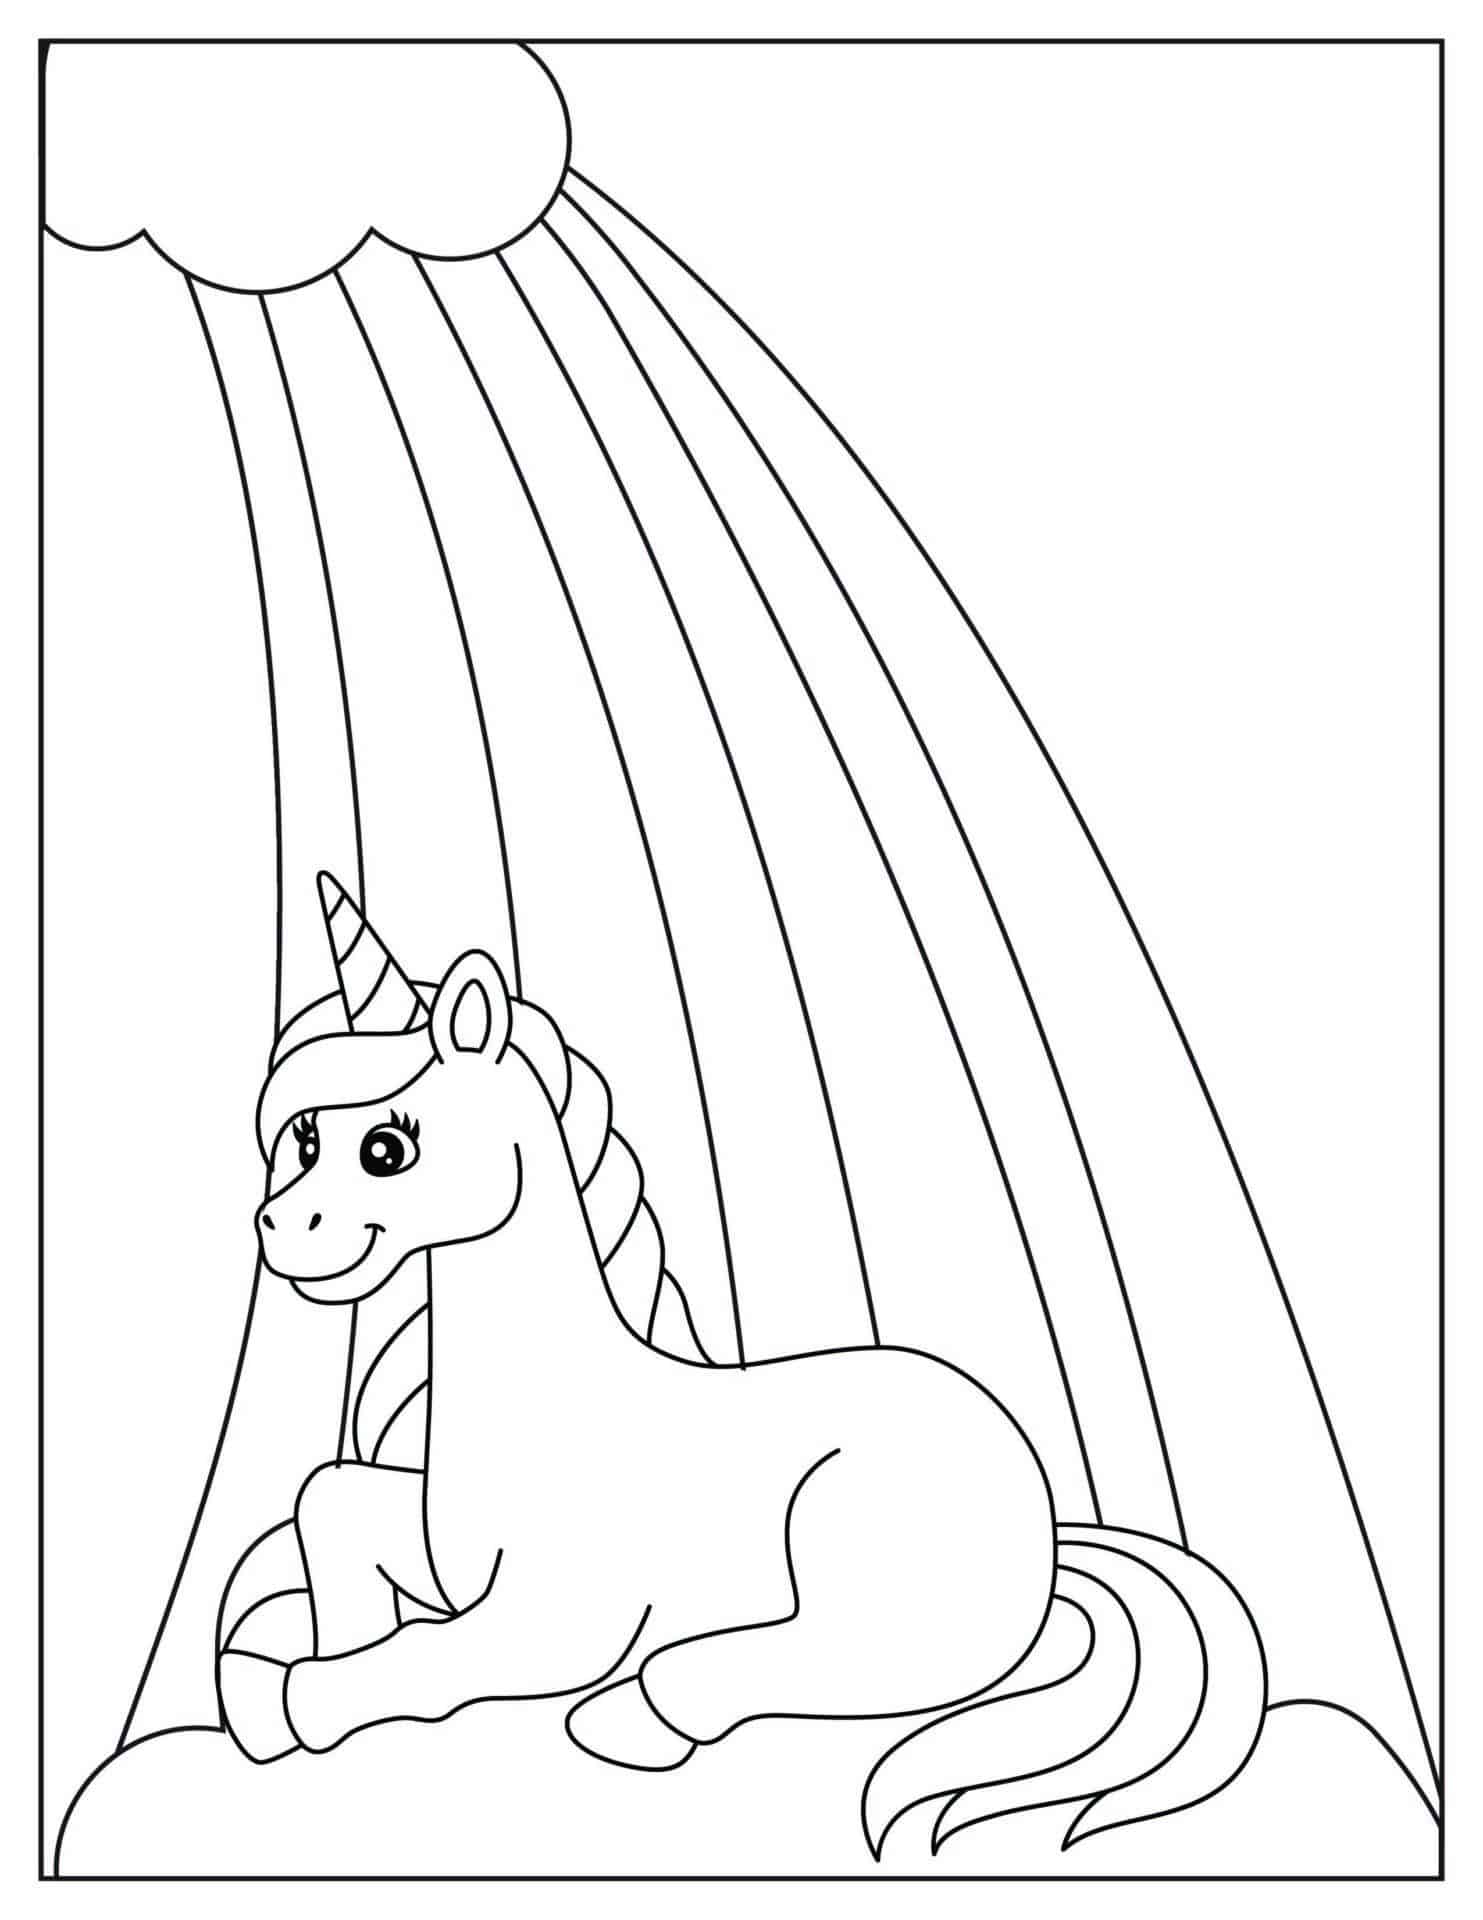 grab-your-free-unicorn-and-rainbow-coloring-pages-20-pages